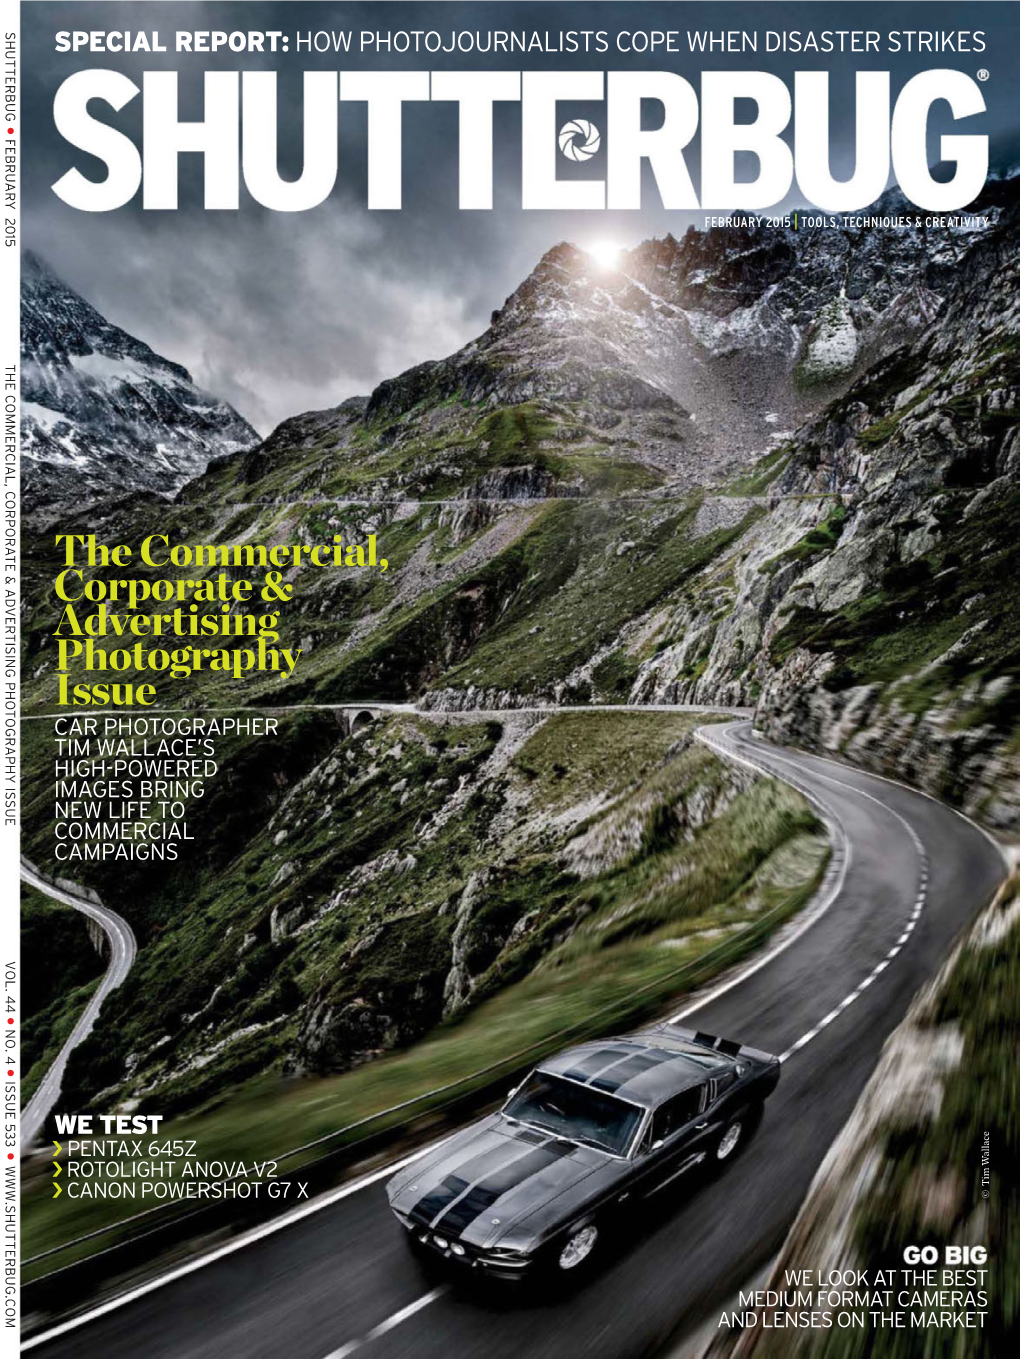 Shutterbug • February 2015 the Commercial, Corporate & Advertising Photography Issue Vol